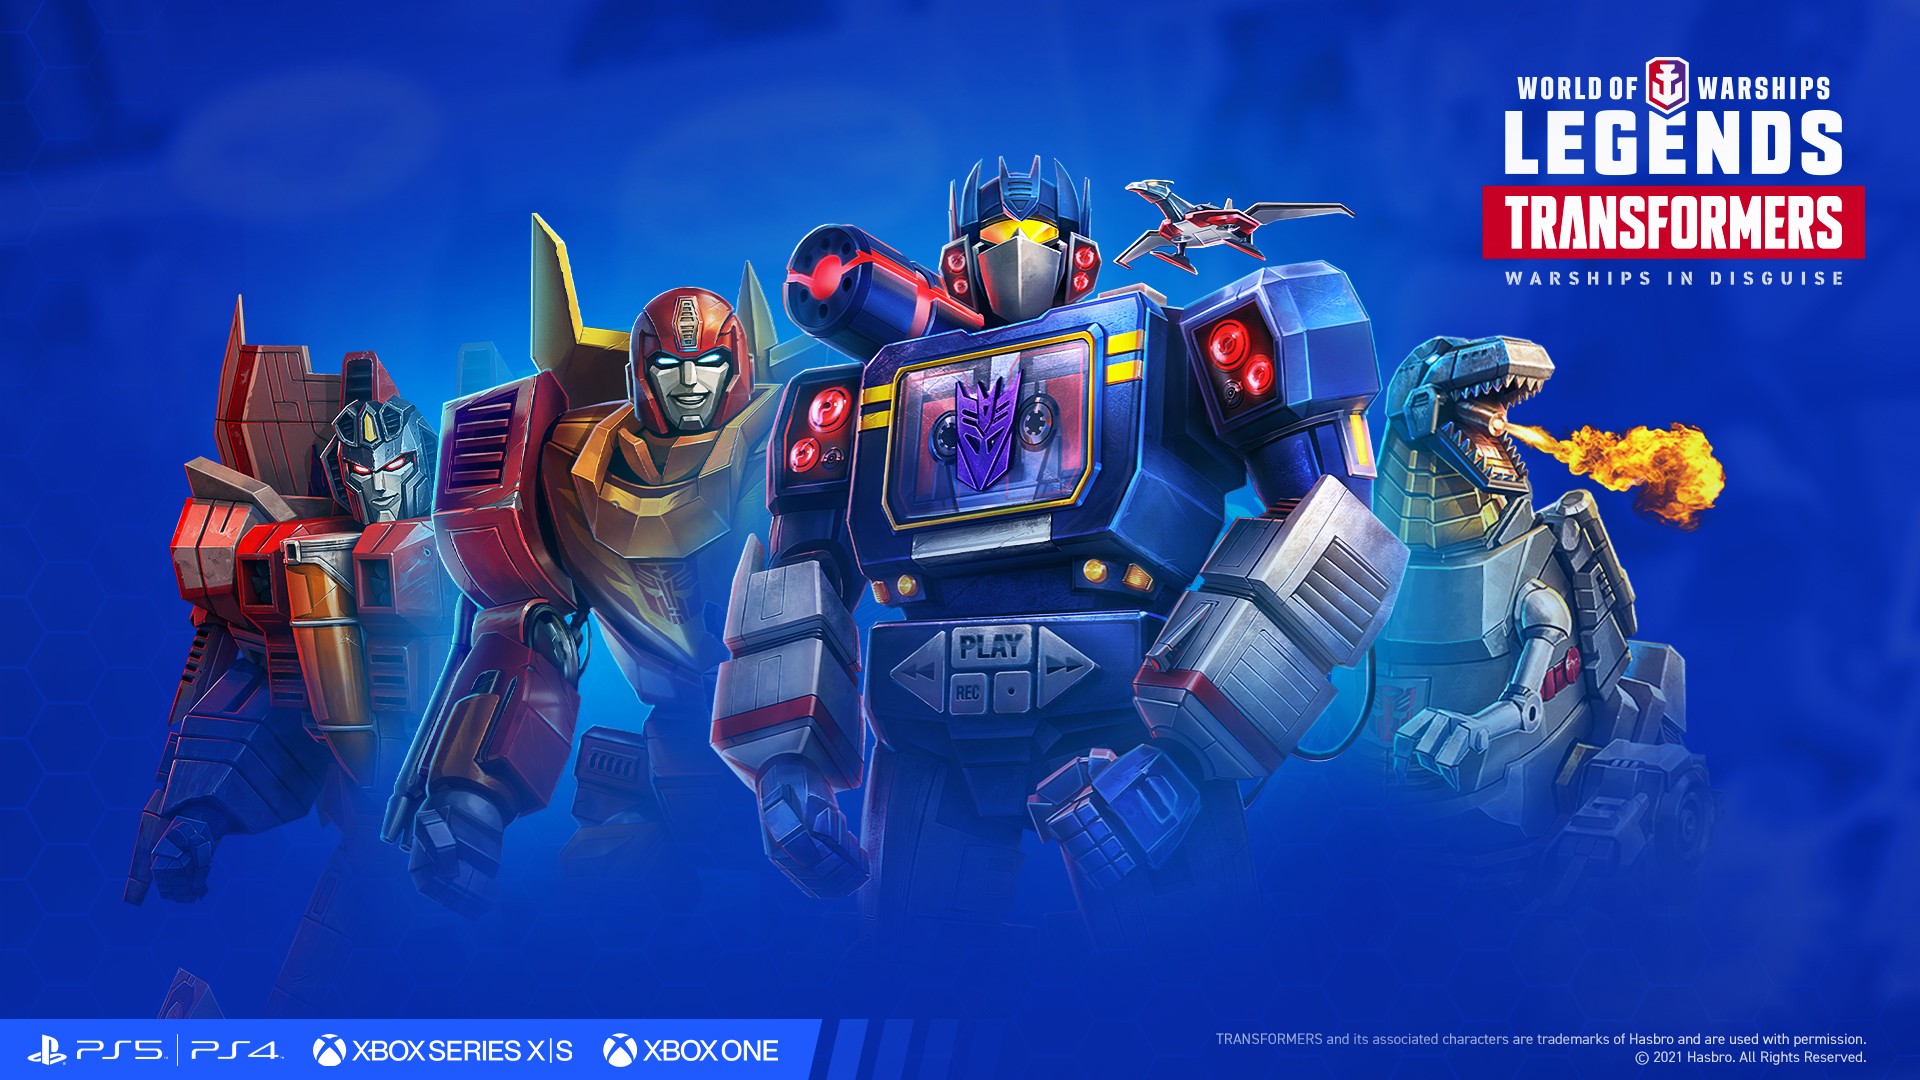 Transformers Takes To The Seas In World of Warships Legends